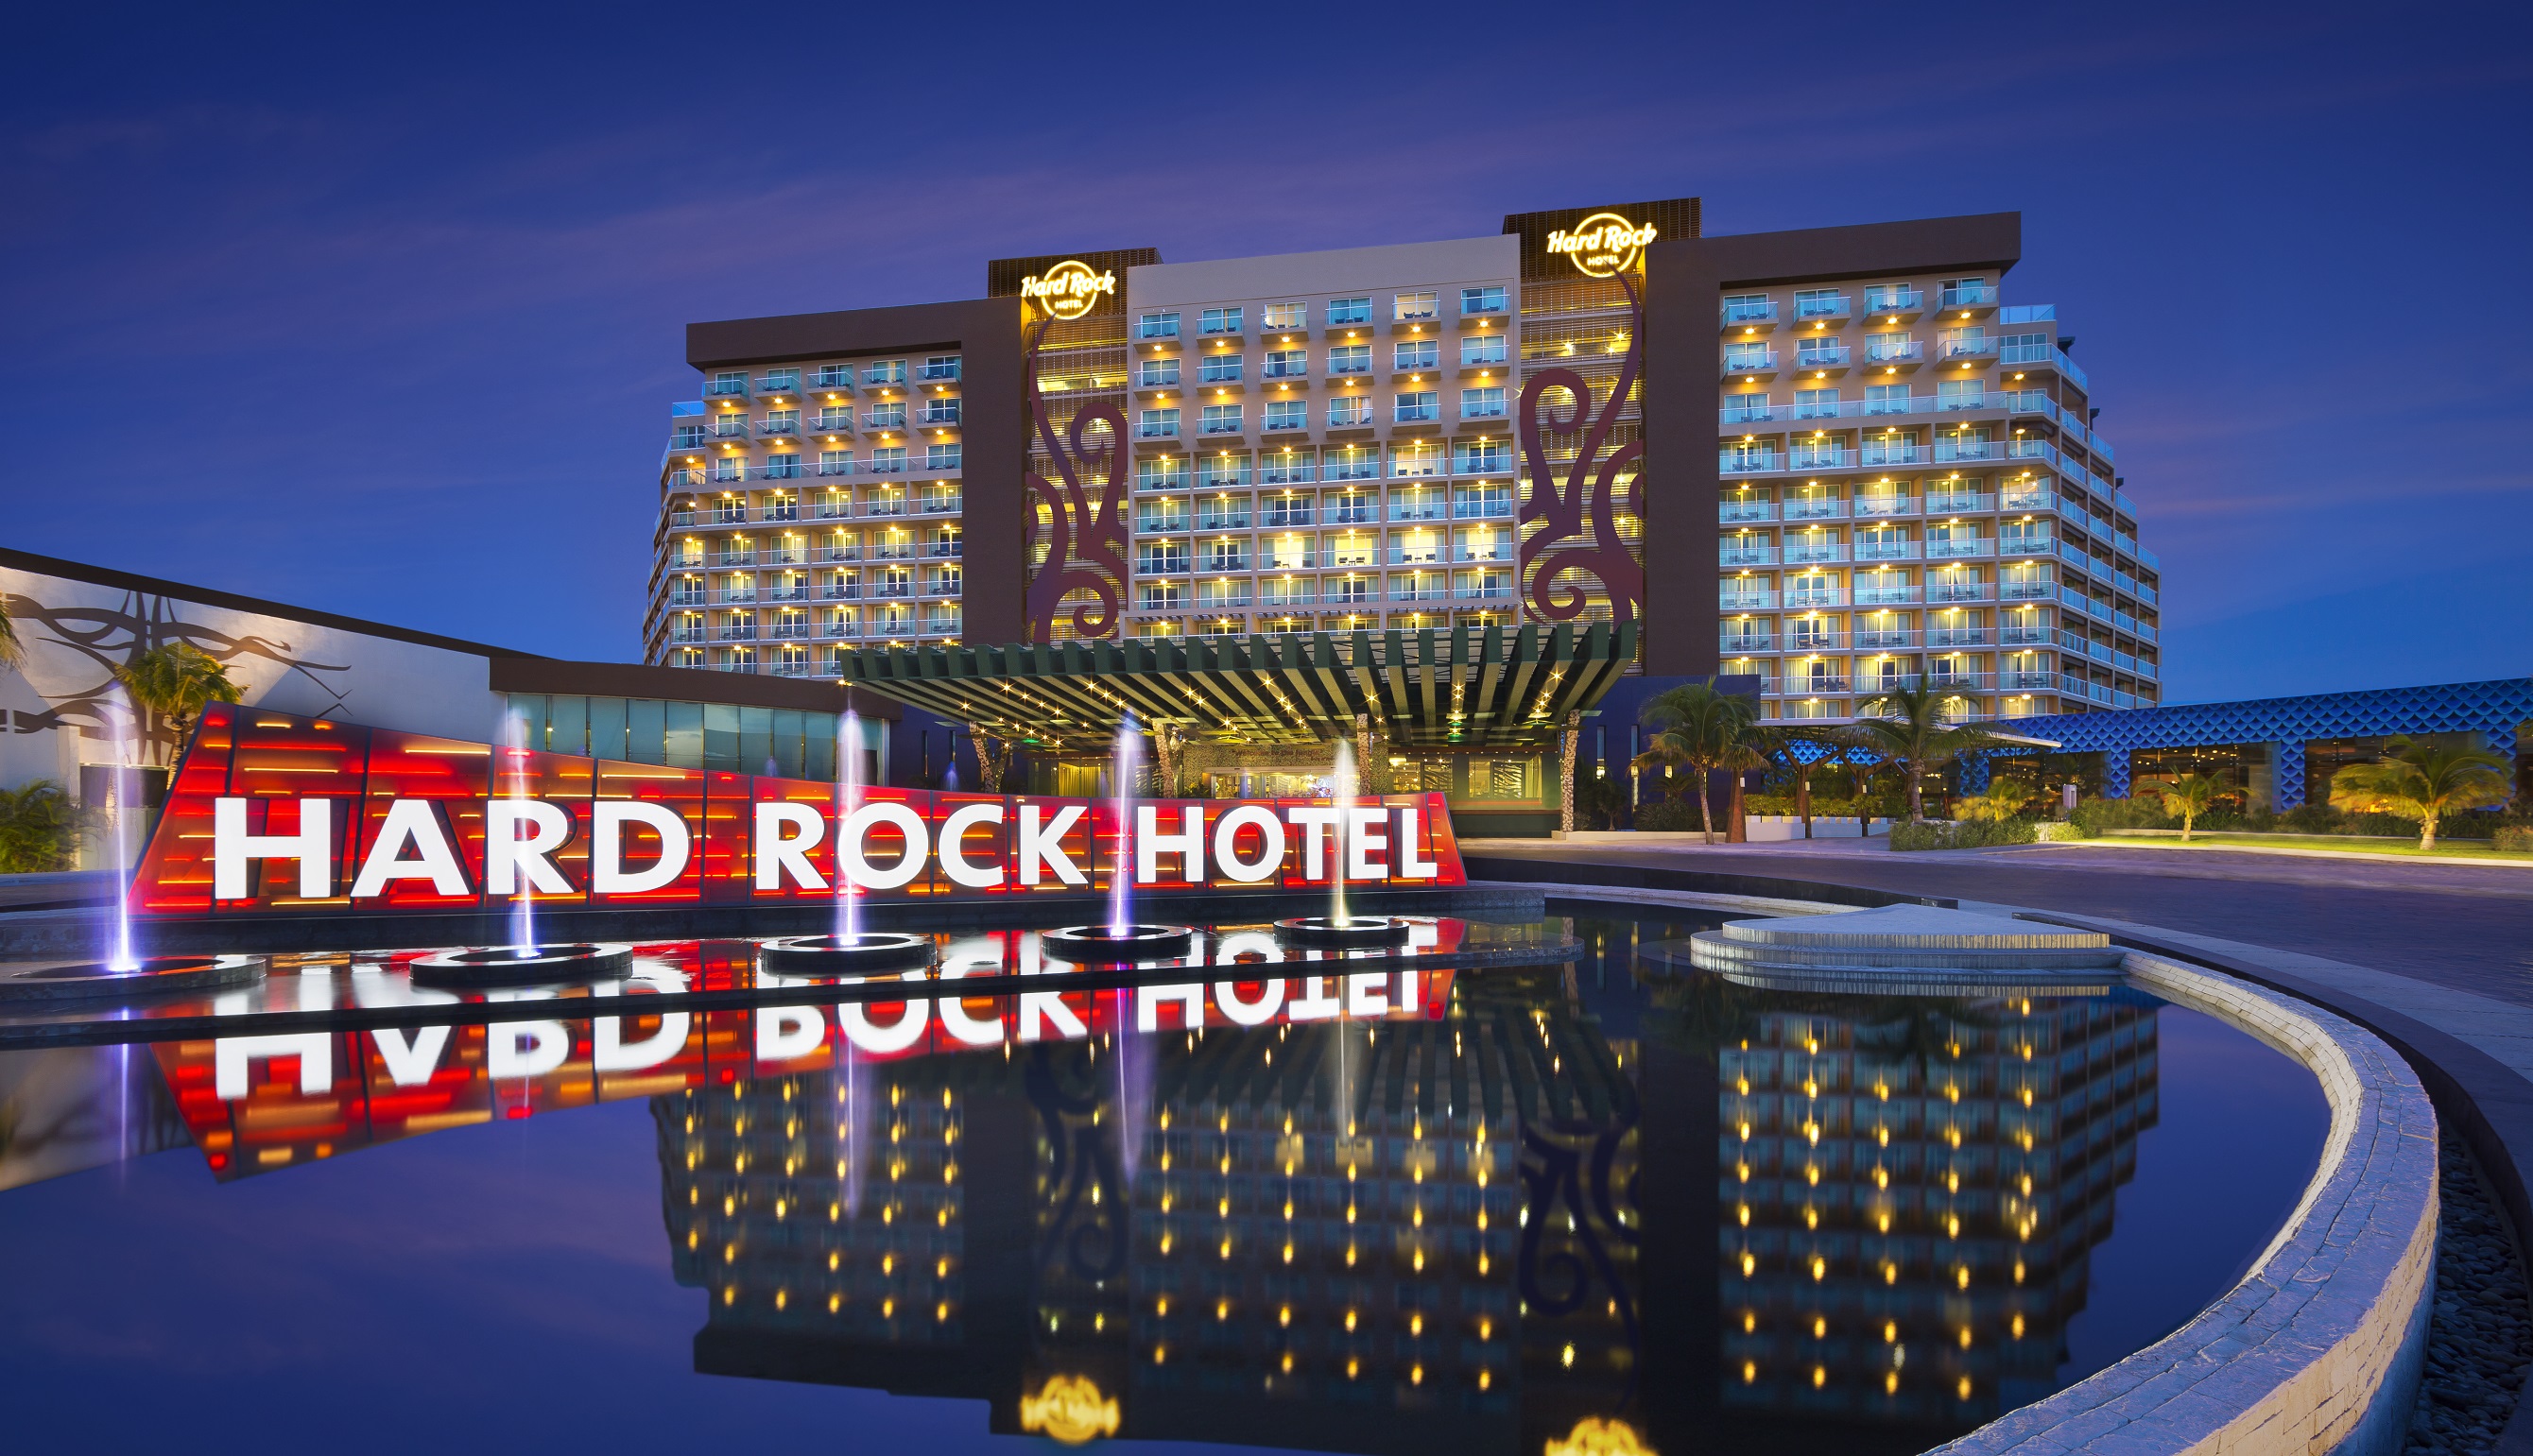 Book your wedding day in Hard Rock Hotel Cancún